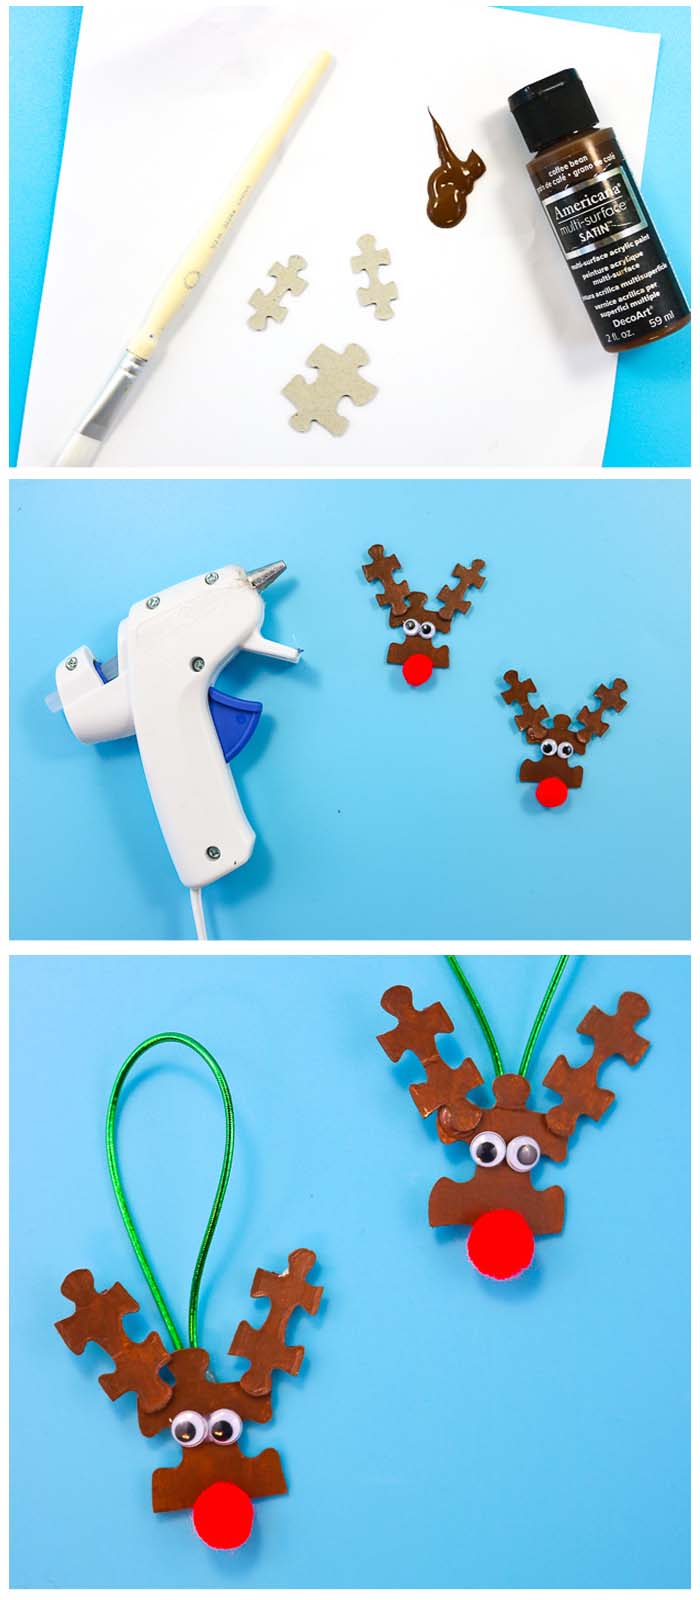 3 photos of step by steps to make reindeer ornaments from puzzle pieces